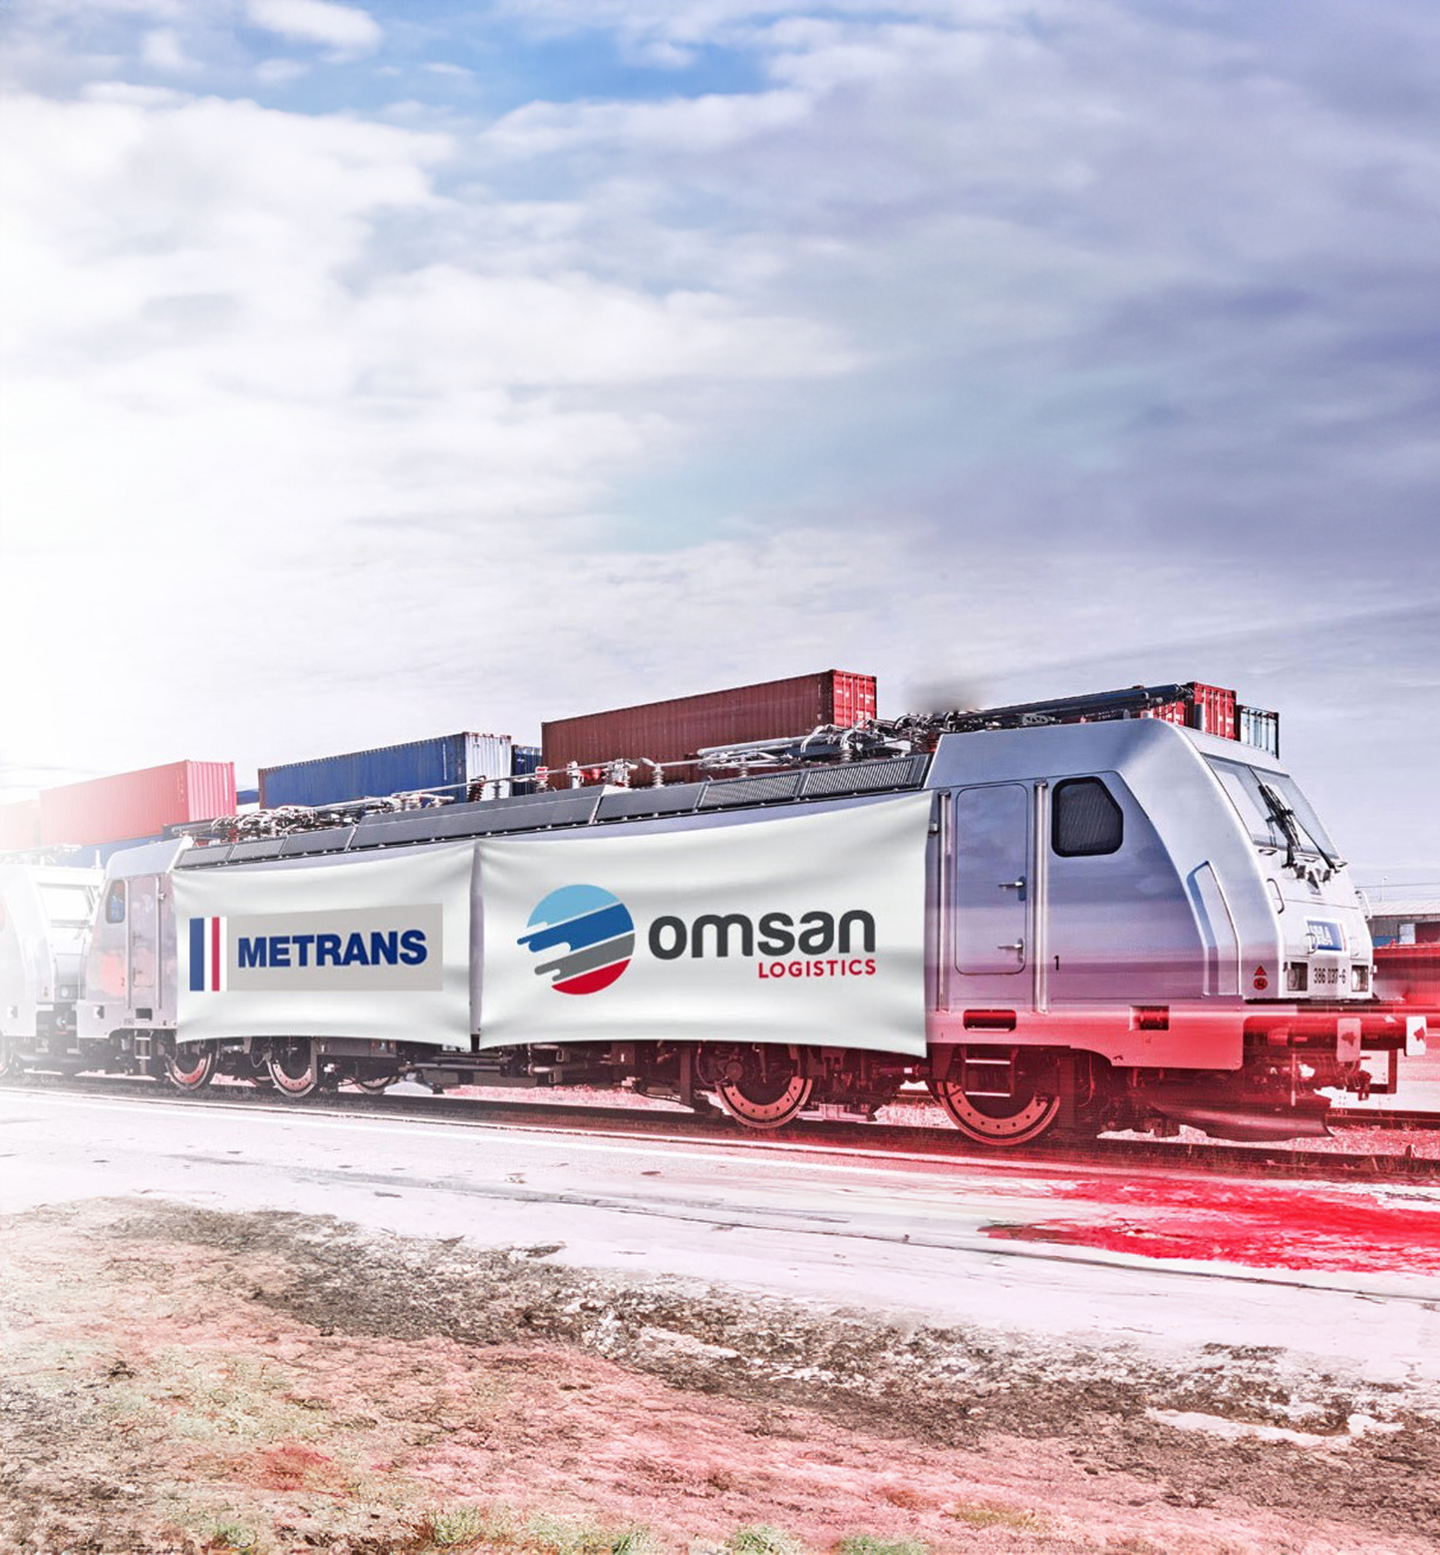 New ‘green line’ from Omsan Logistics to Europe